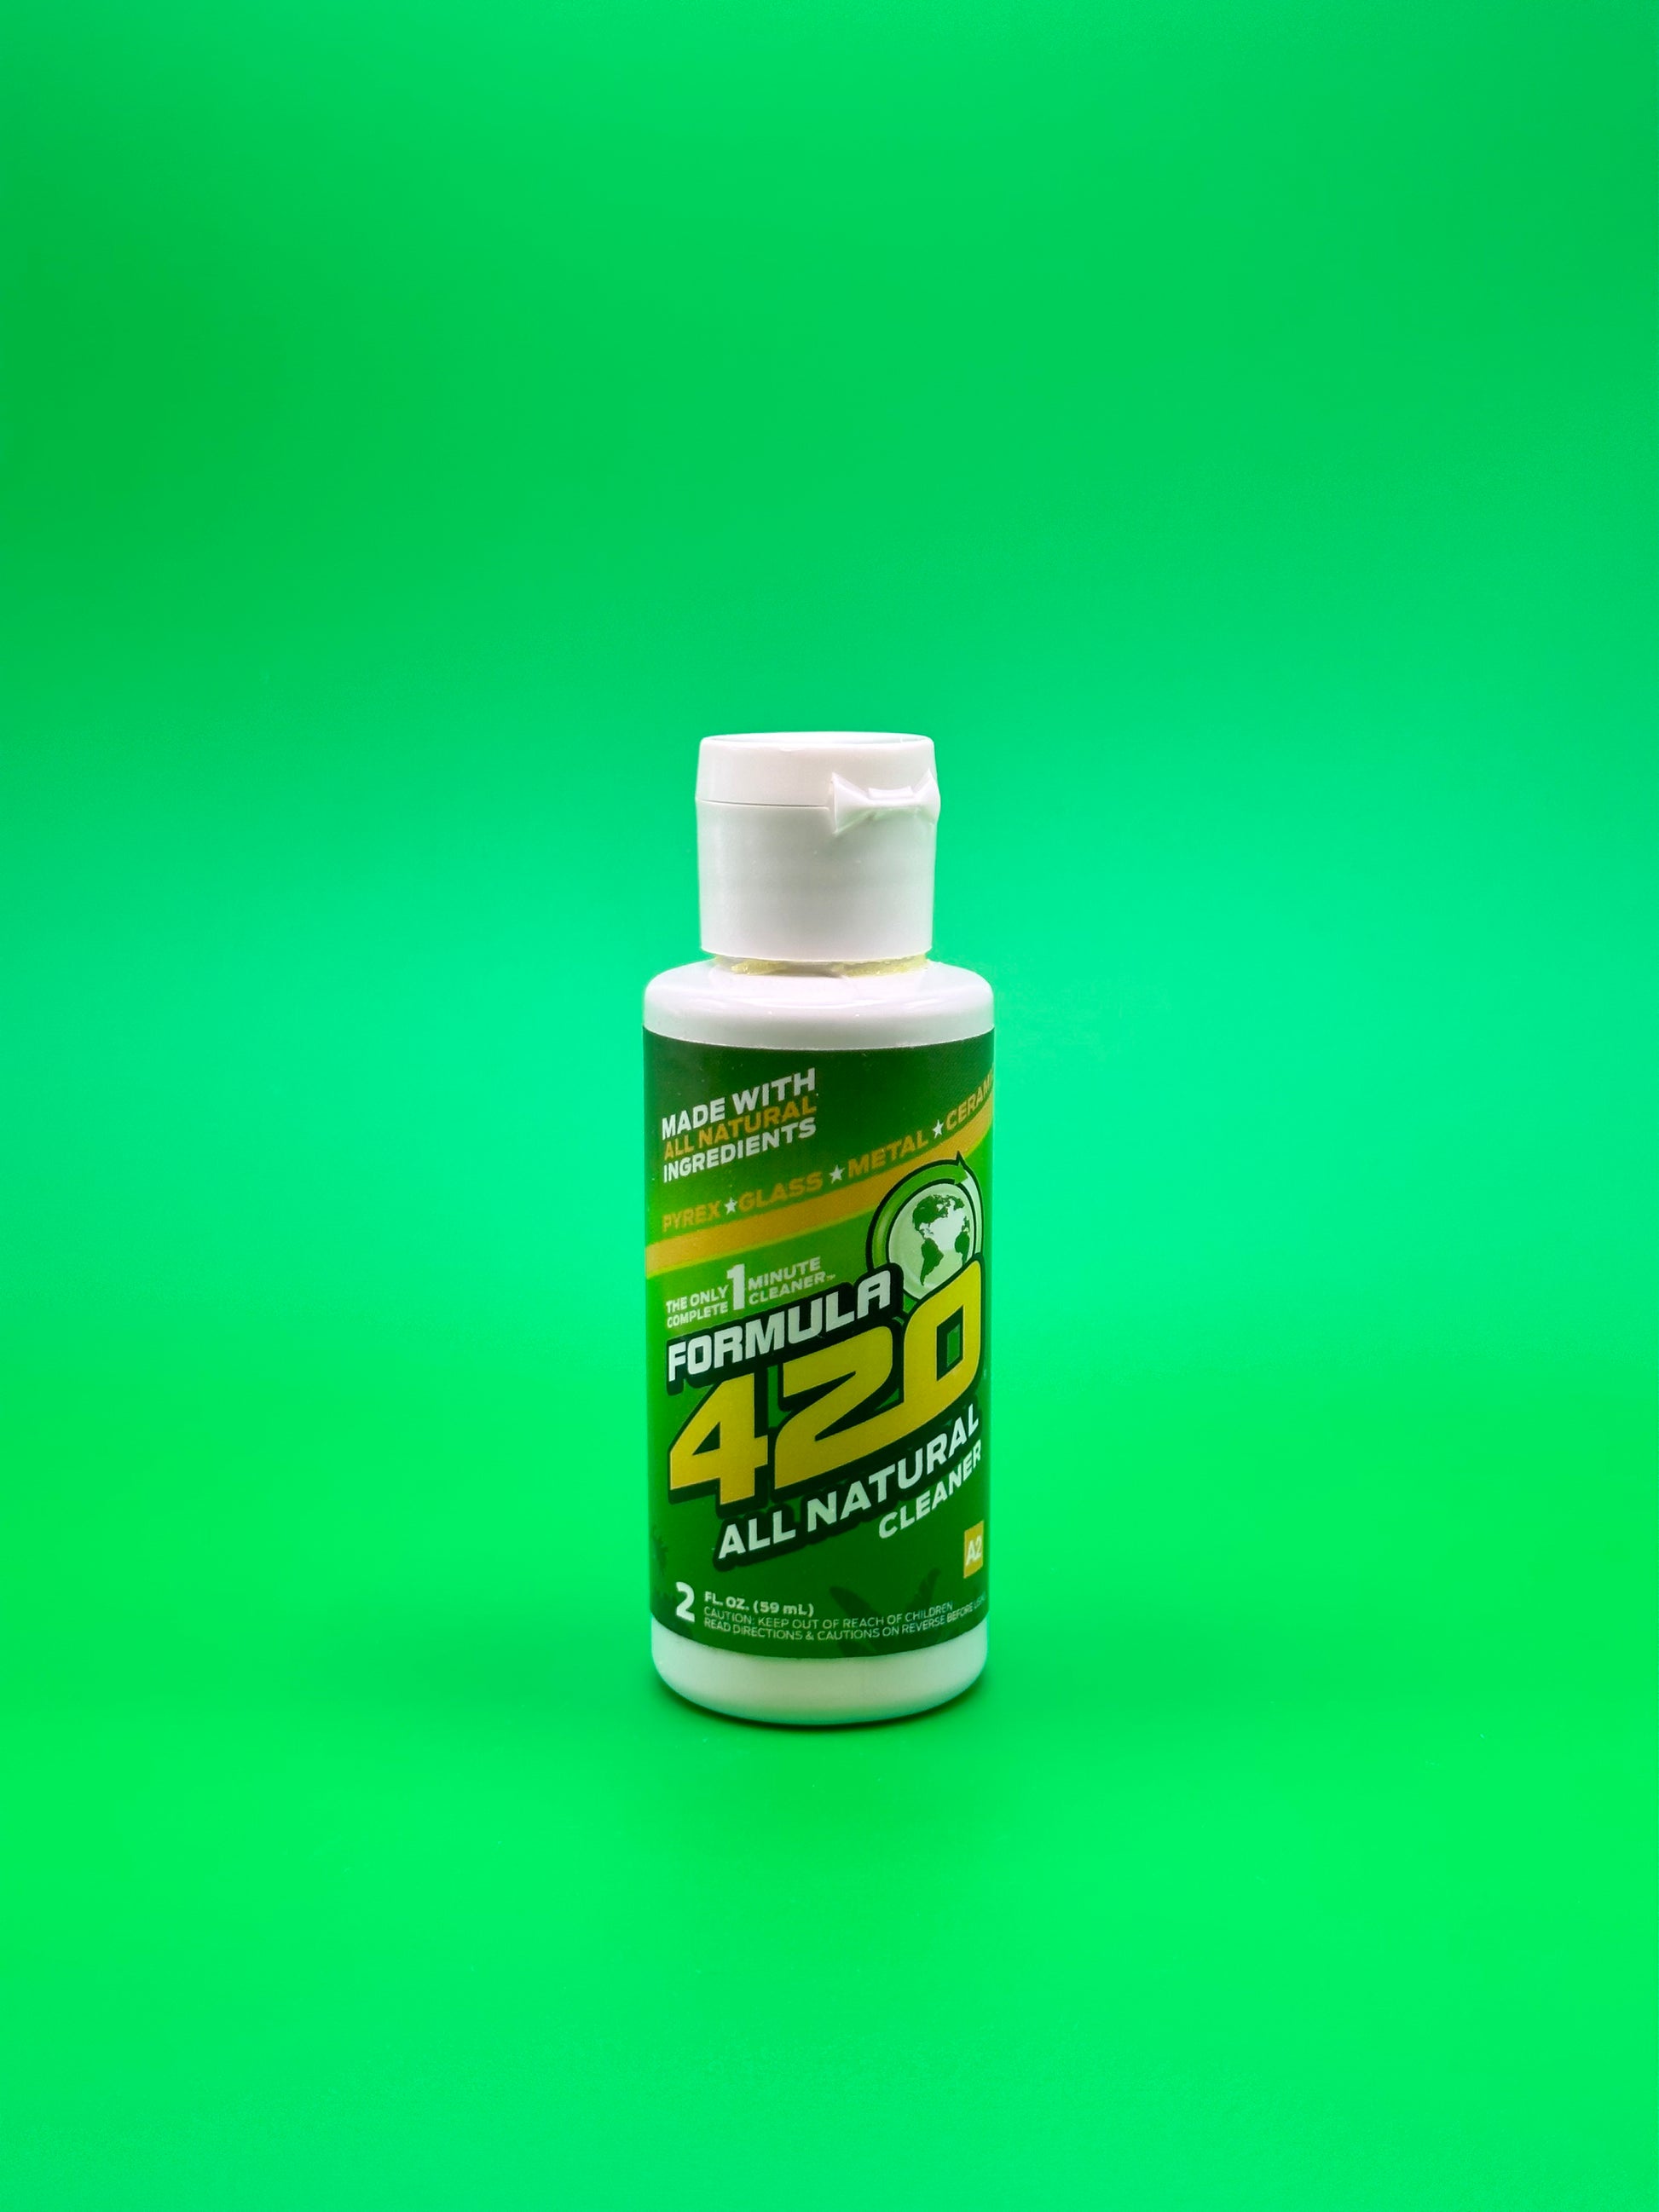  All Natural by Formula 420, Glass Cleaner